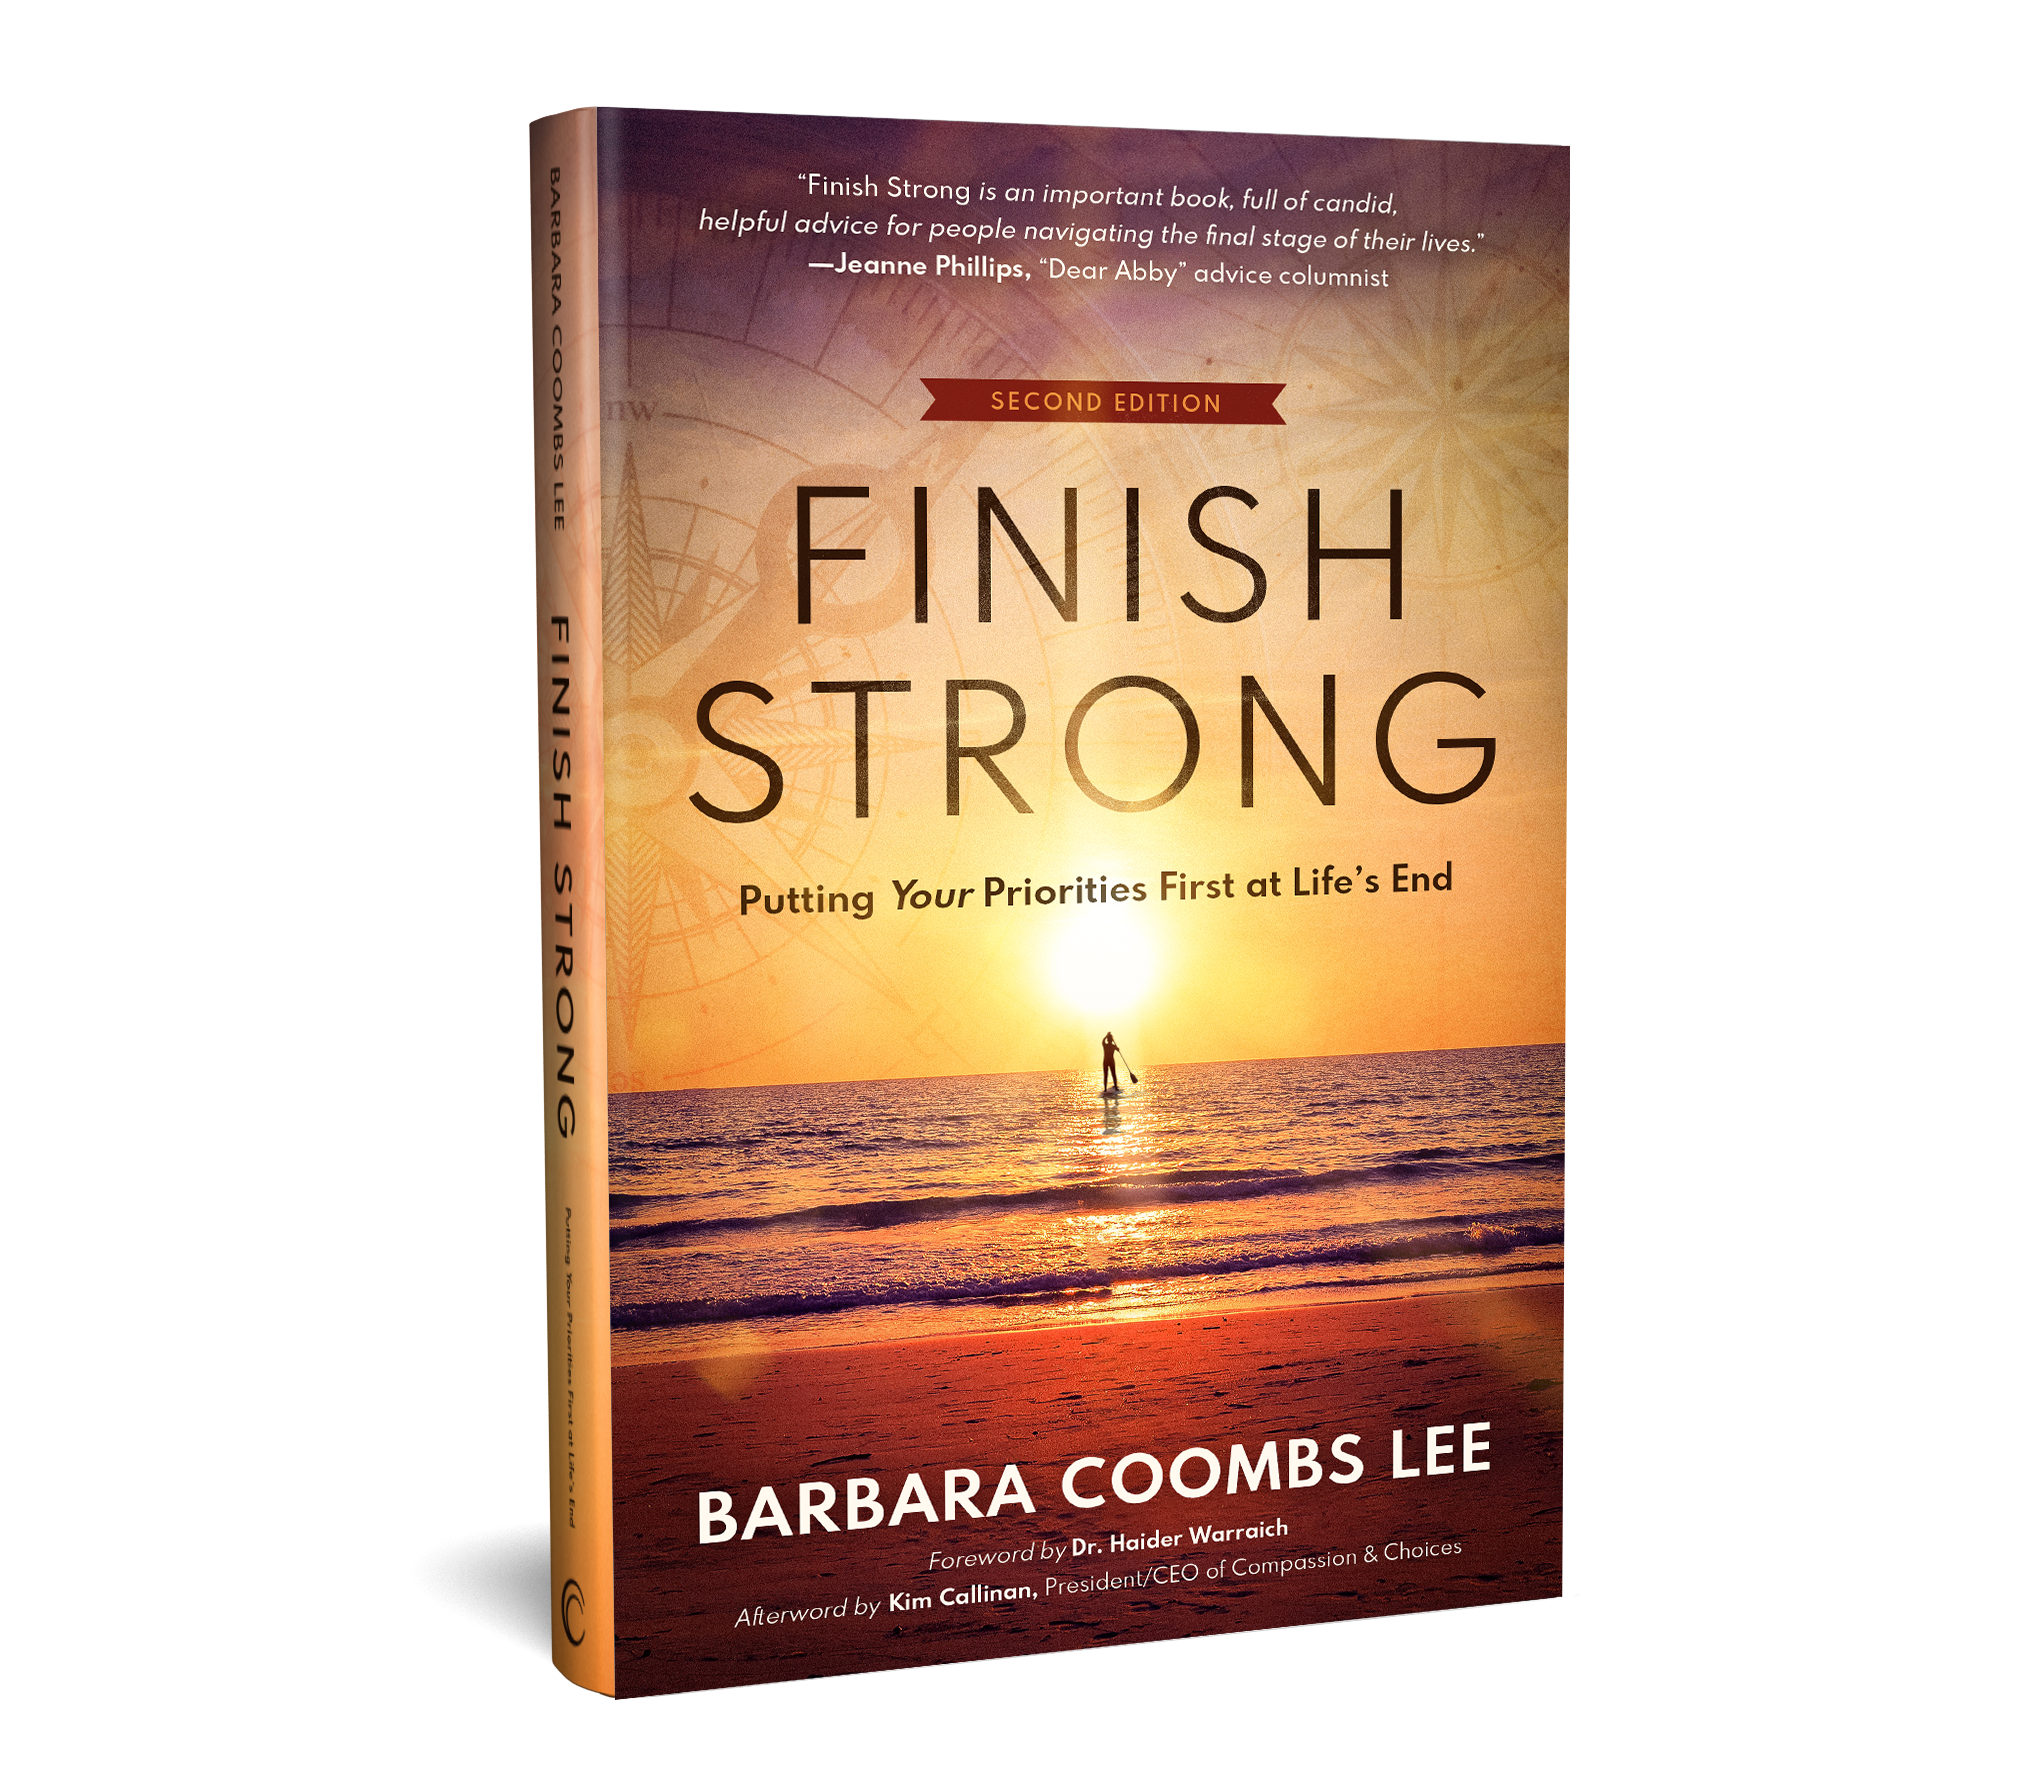 Cover photo of Finish Strong second edition